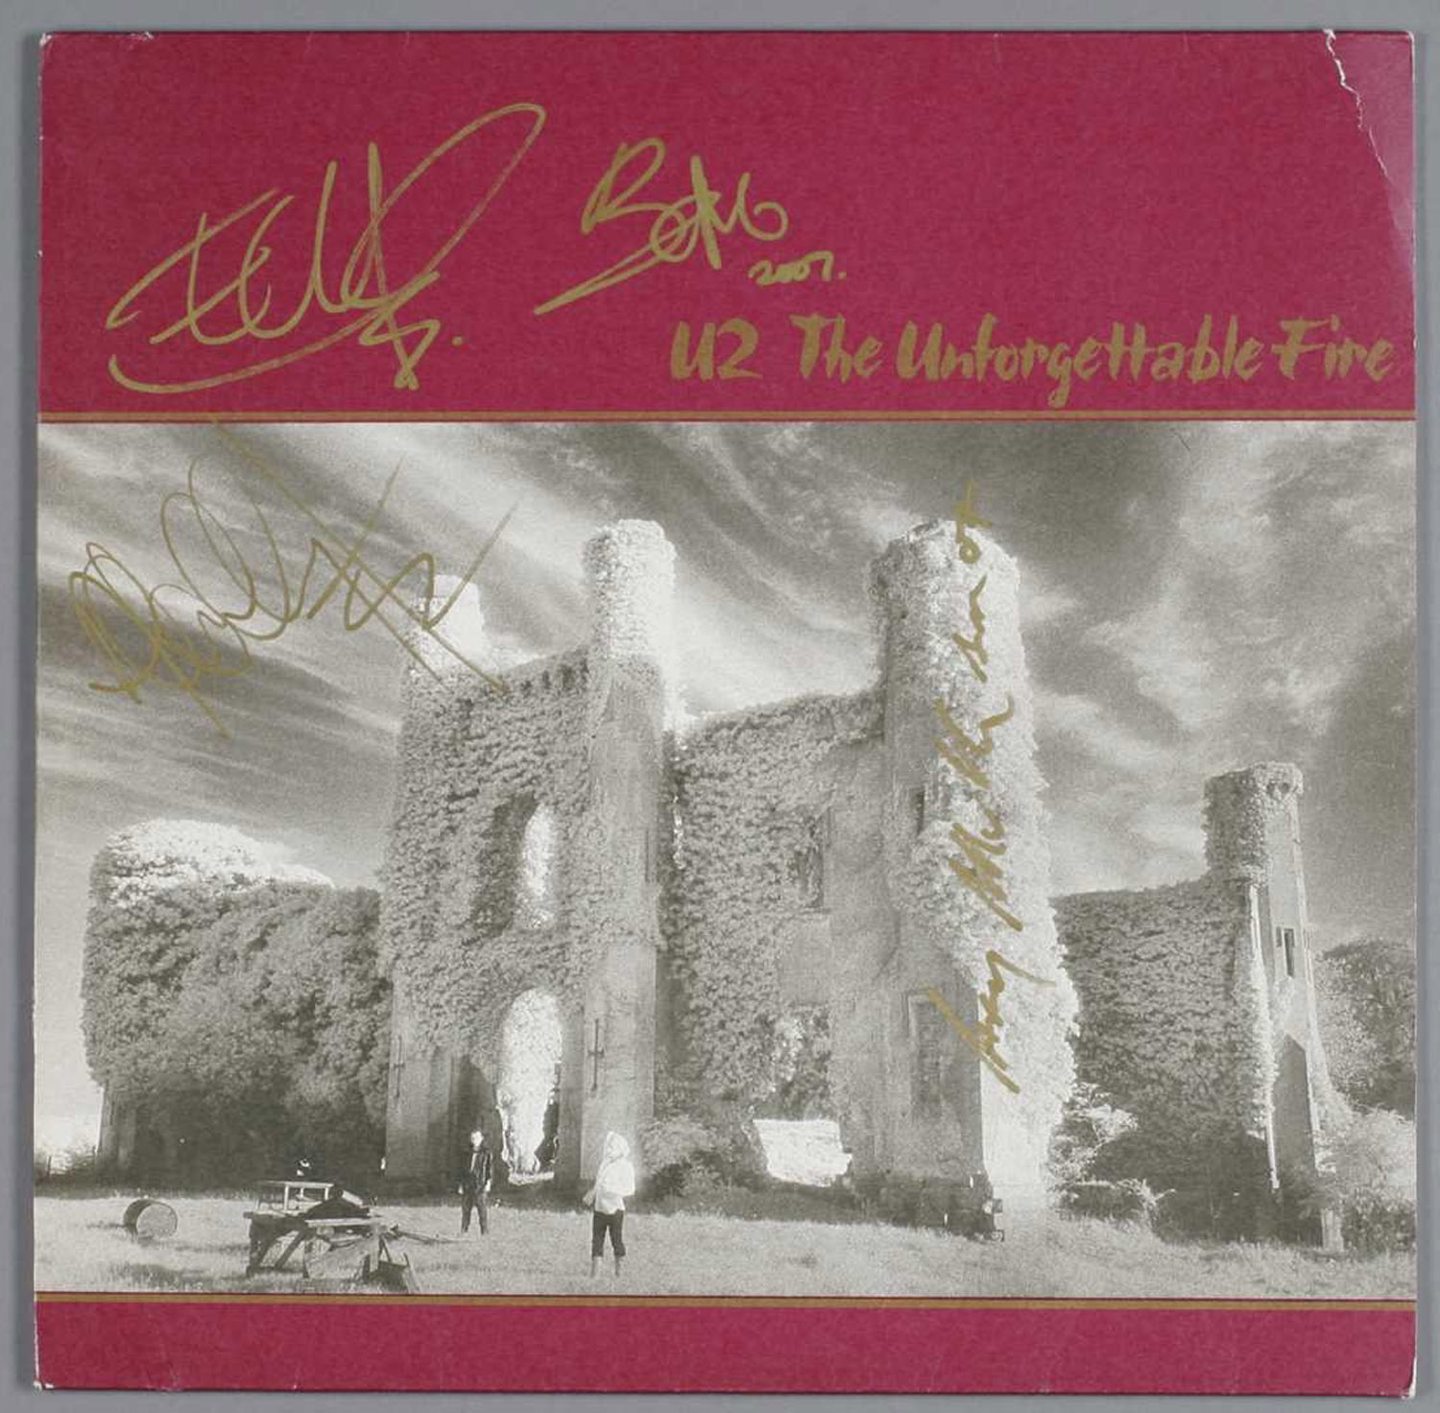 U2 would follow up War with The Unforgettable Fire, released in 1984. Image: Shutterstock.